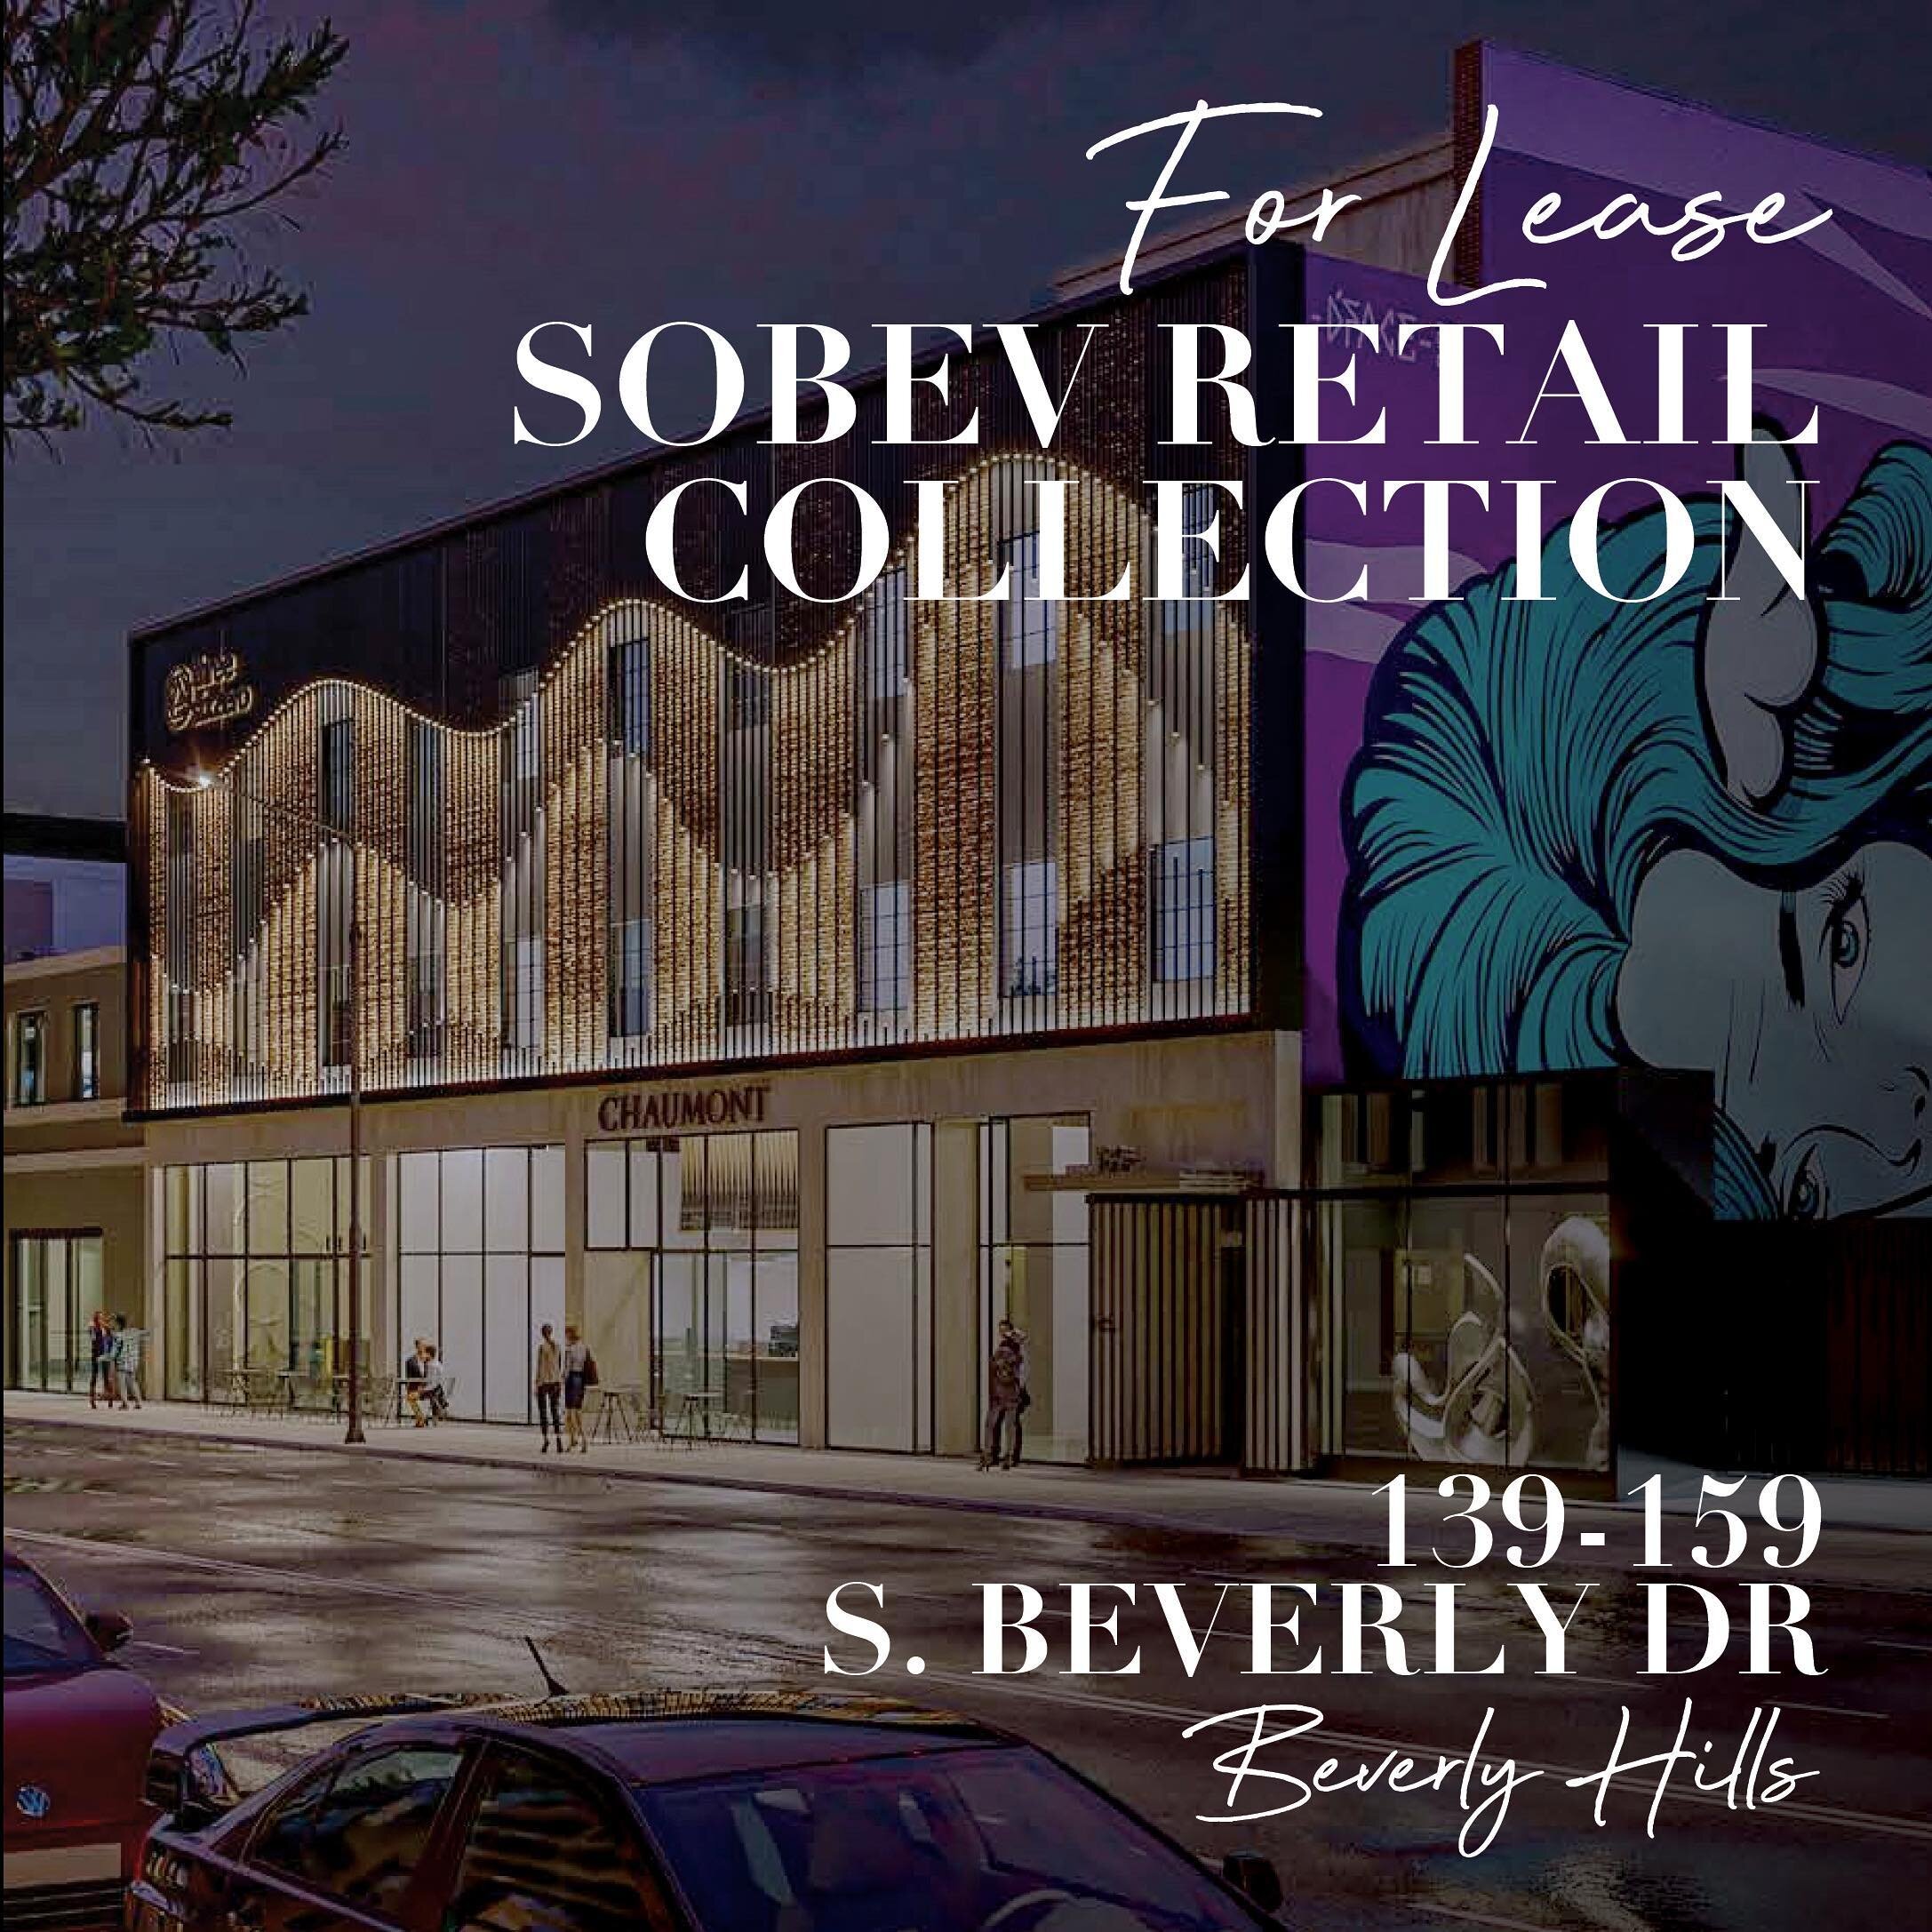 Now Available For Lease // South Beverly Drive Retail Collection - Prime Beverly Hills retail &amp; restaurant opportunities.

@jakezacuto | @leor_s_b | @andrewsinasohn | @benkay6